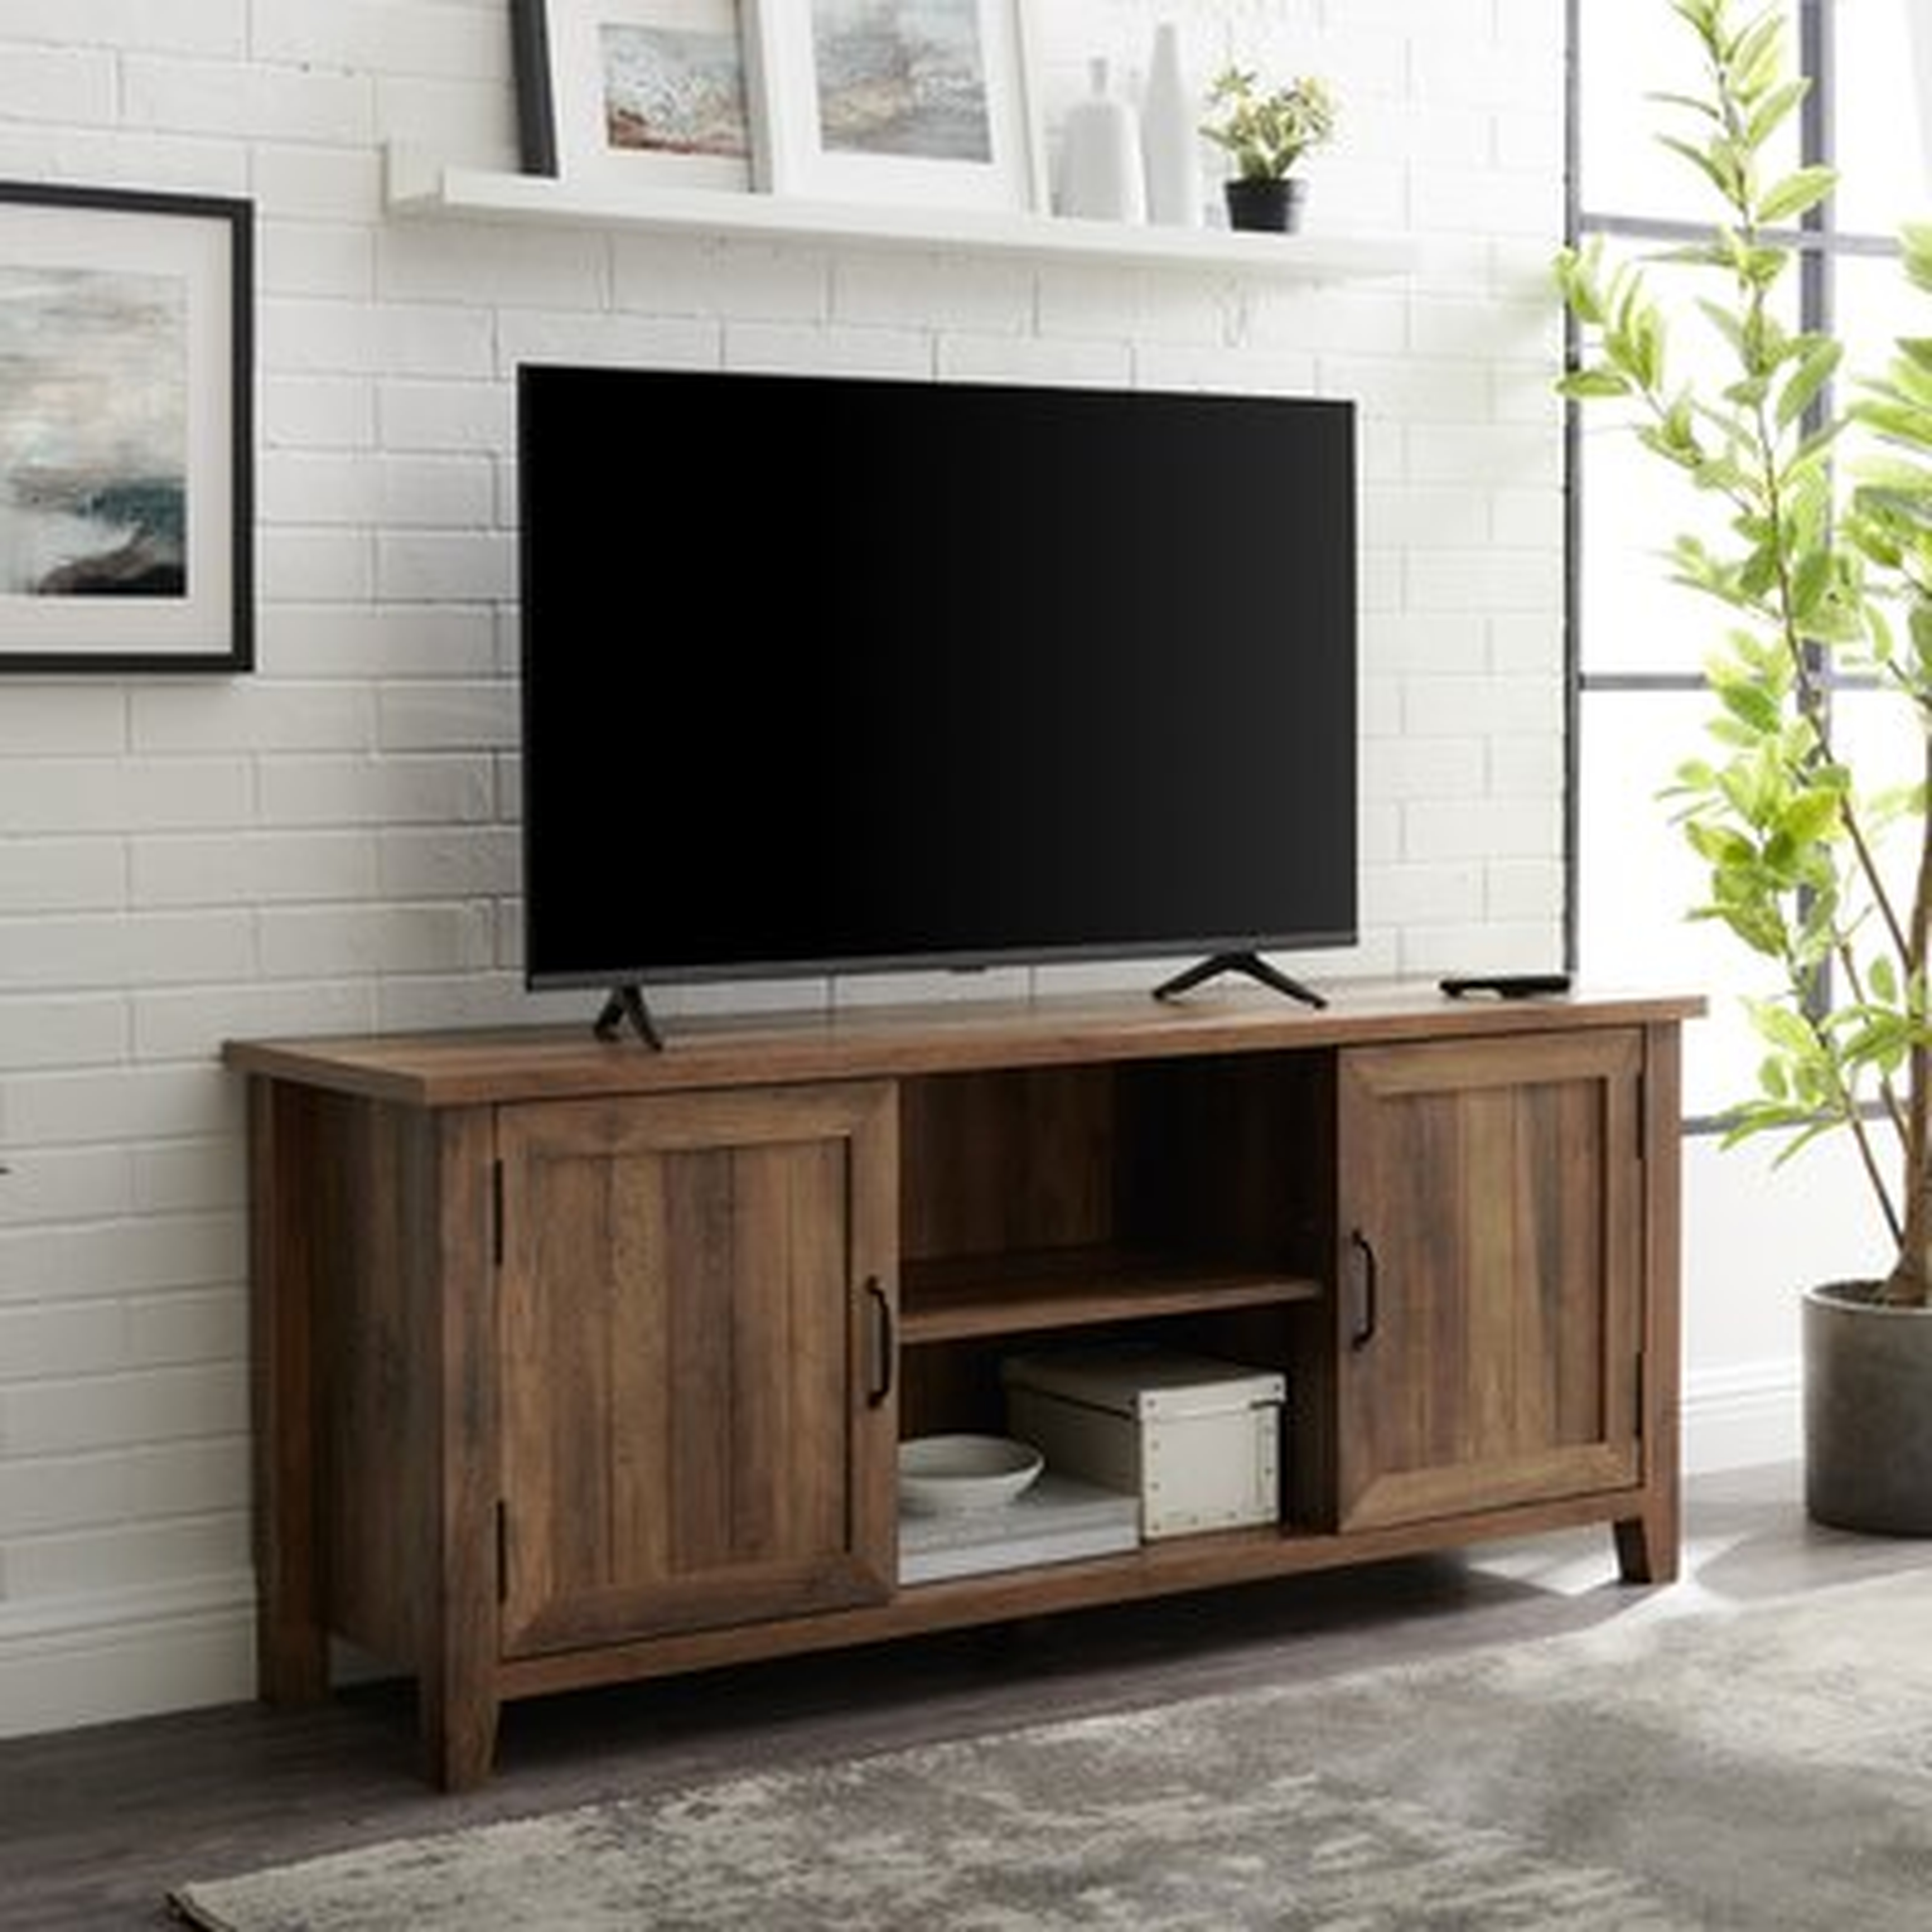 Chatham Square TV Stand for TVs up to 65" - Wayfair